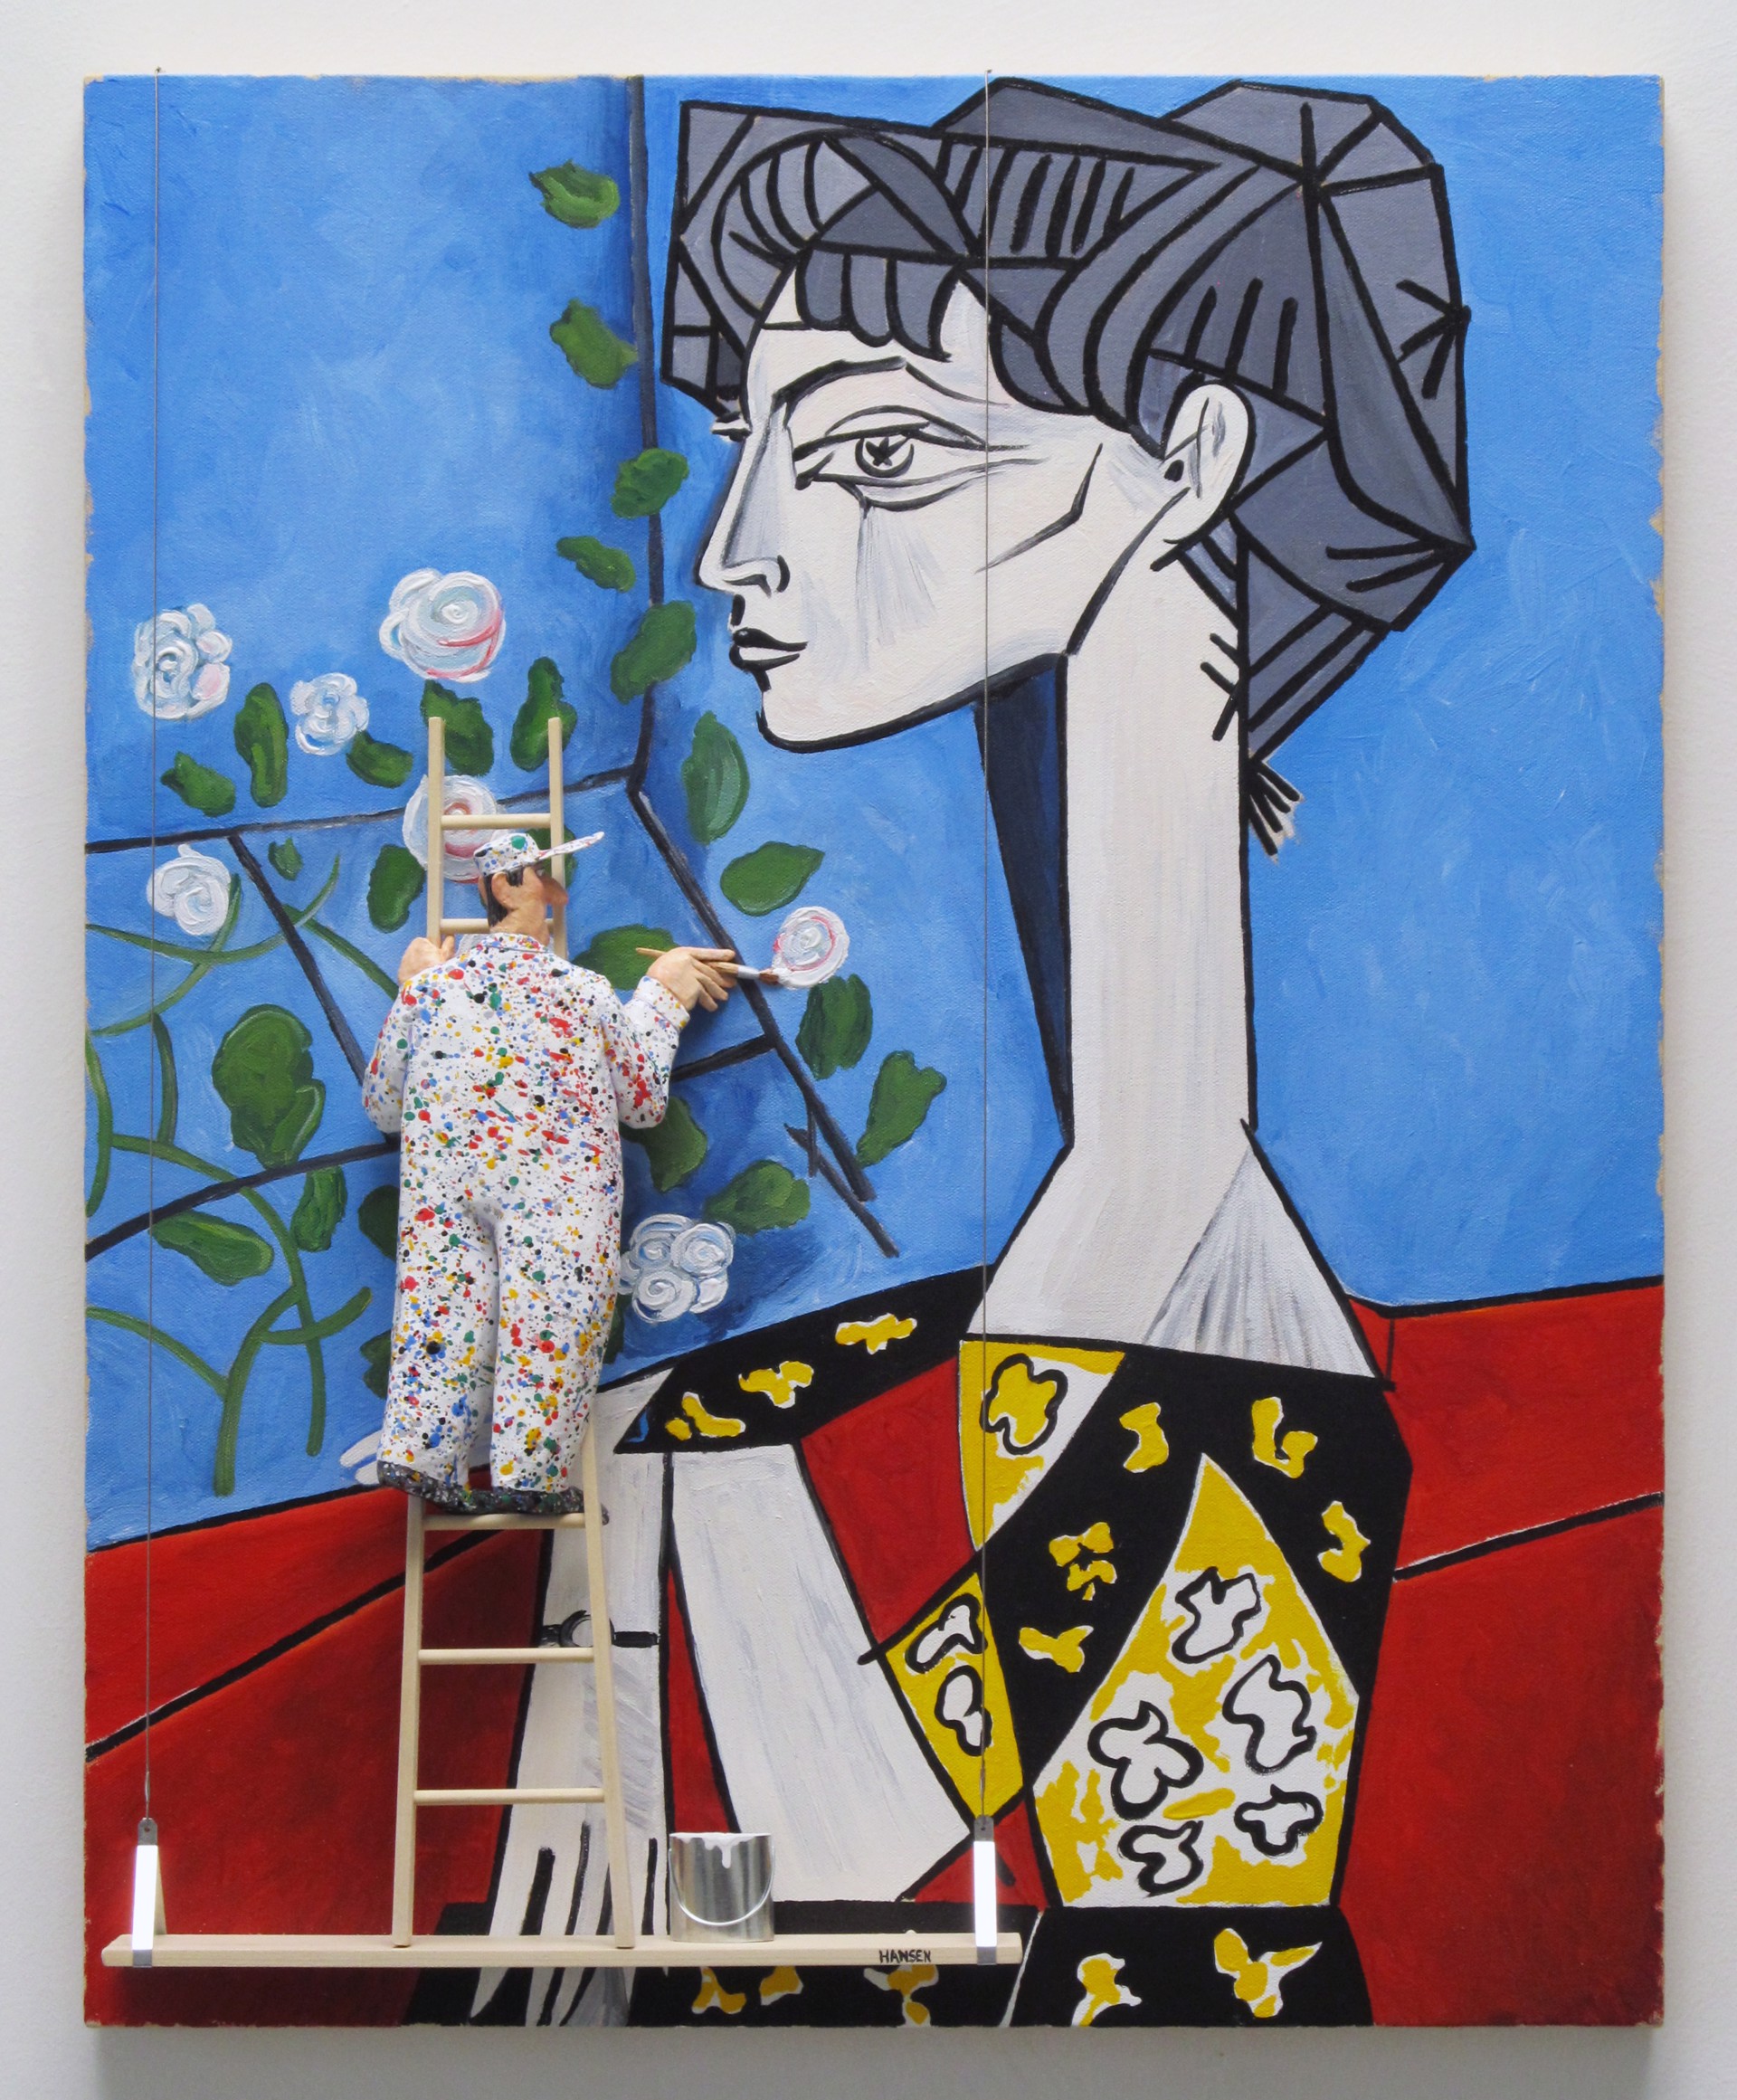 Jacqueline with Flowers (Picasso) by Stephen Hansen